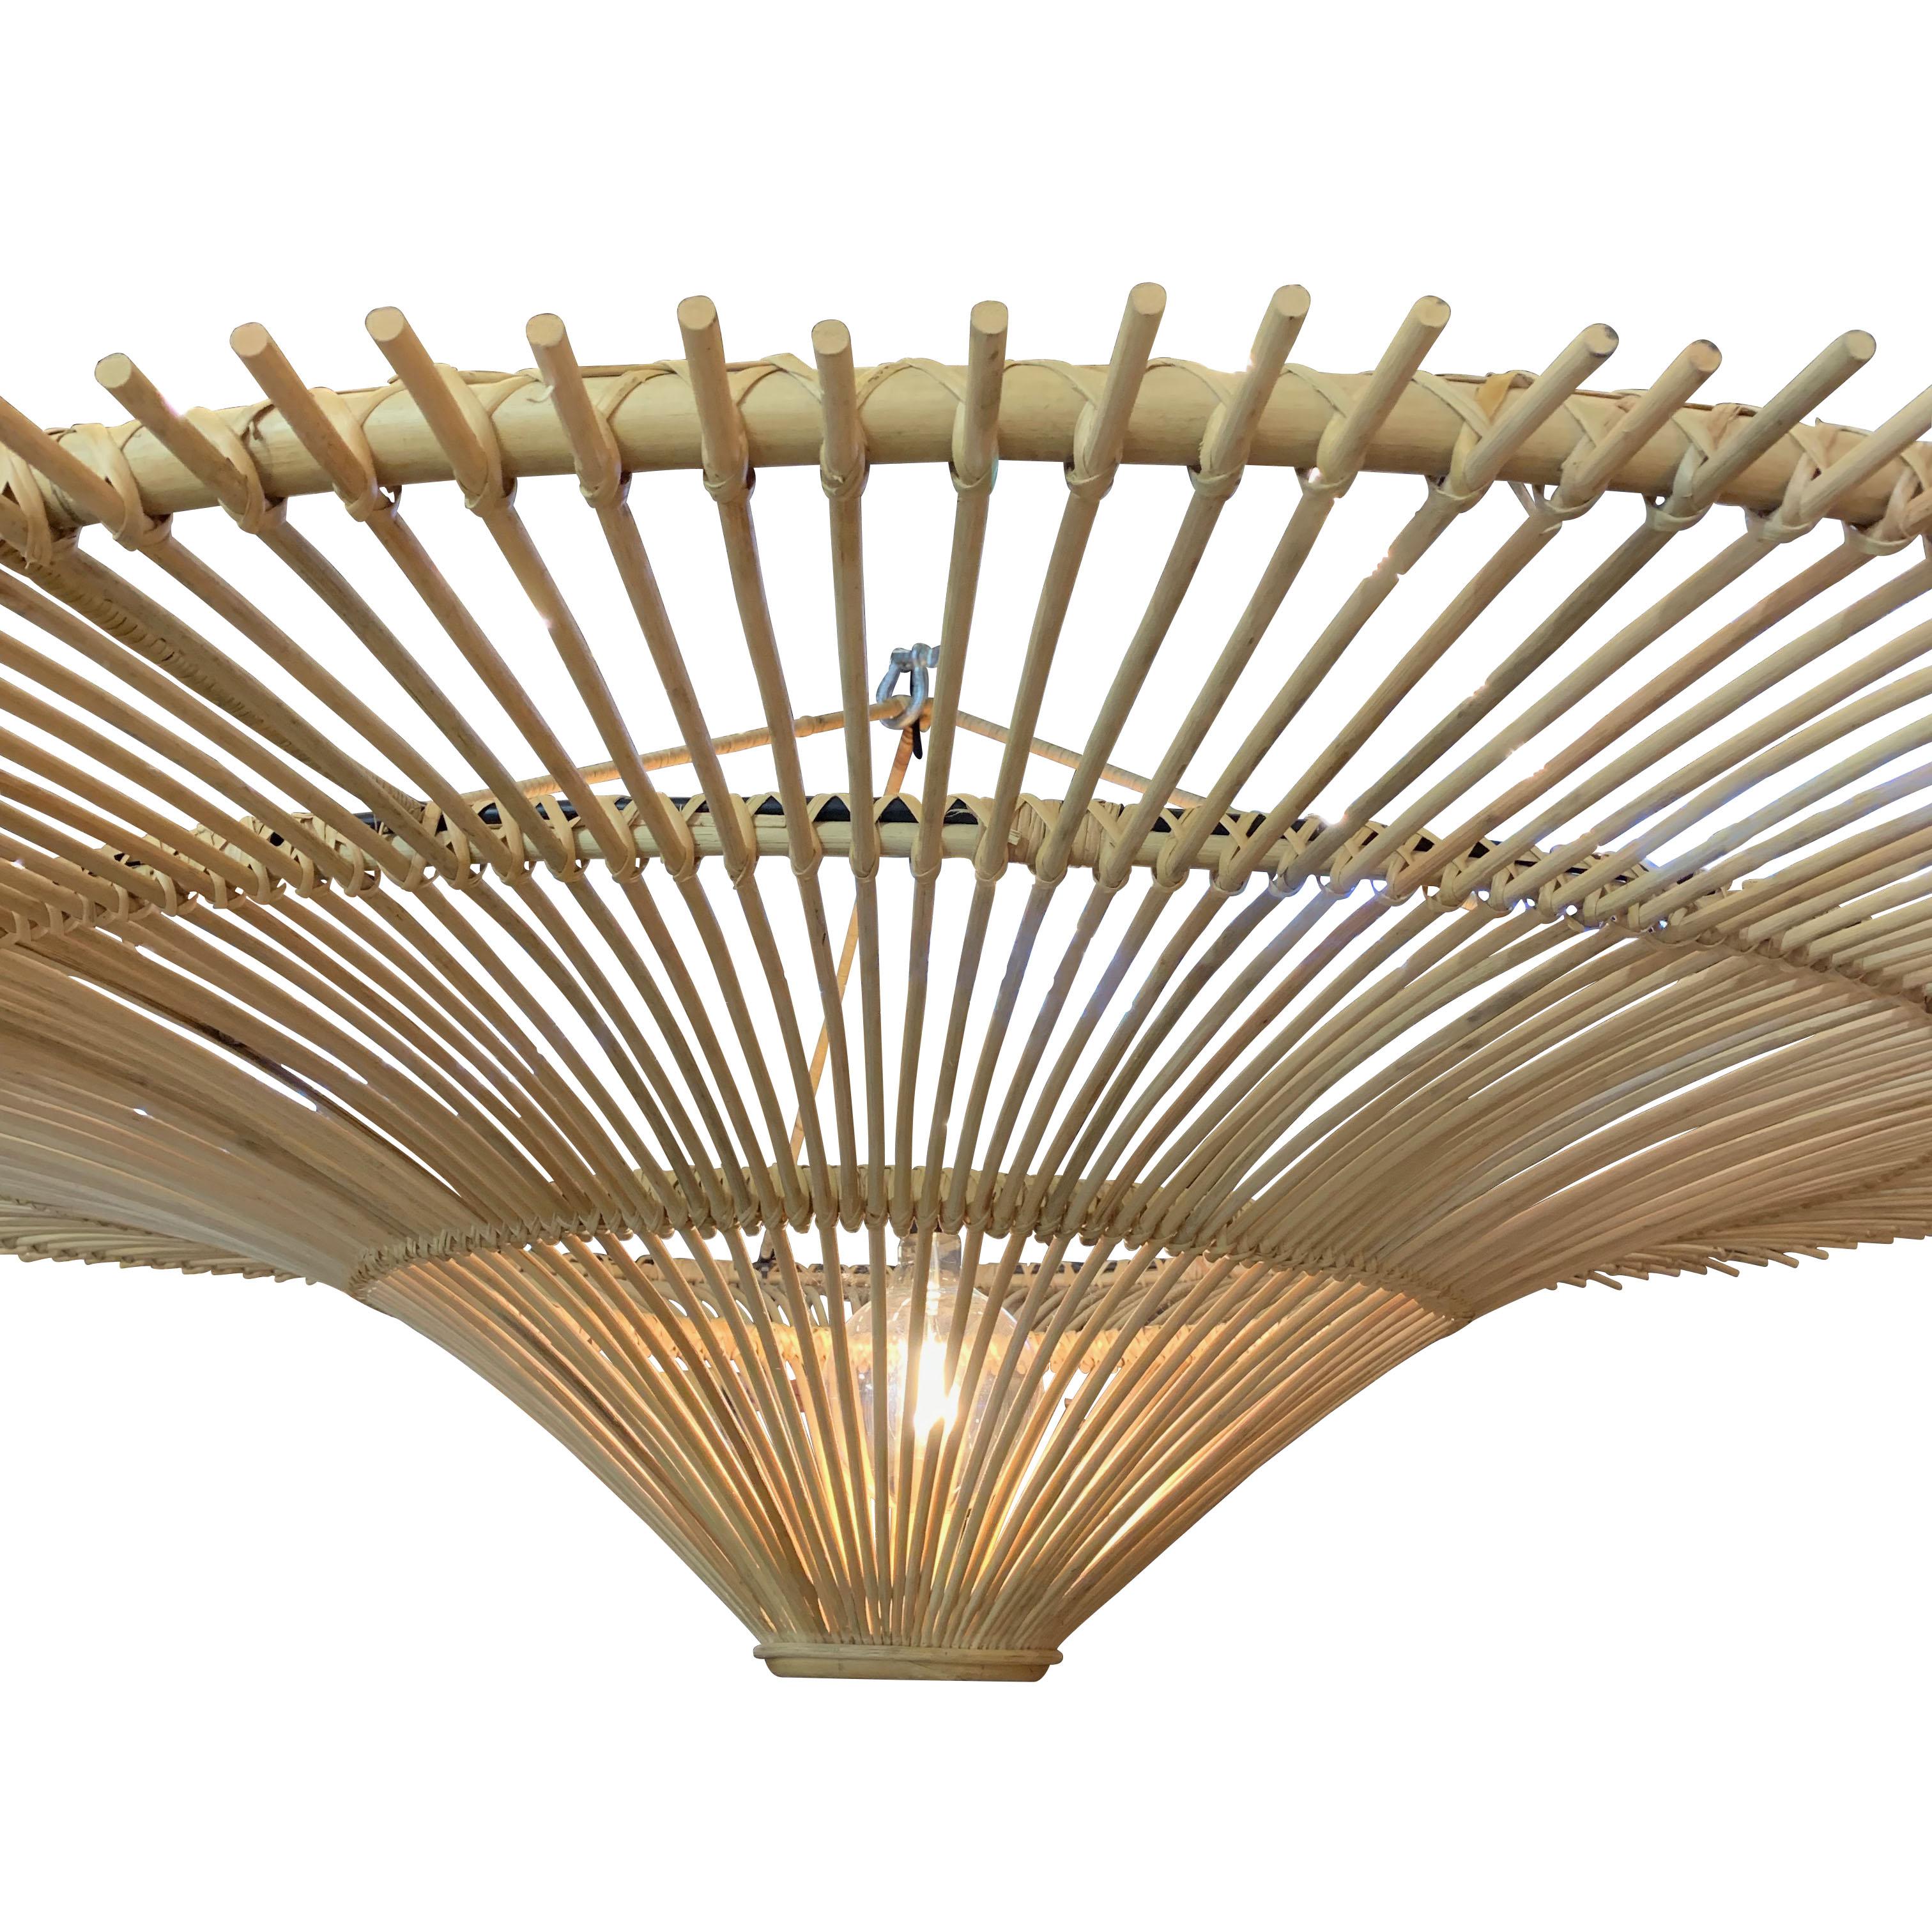 Contemporary Indonesian medium size round umbrella shaped chandelier made of bamboo.
Single bulb.
60watt to 300 watt maximum
Arriving August
Also available in large 71